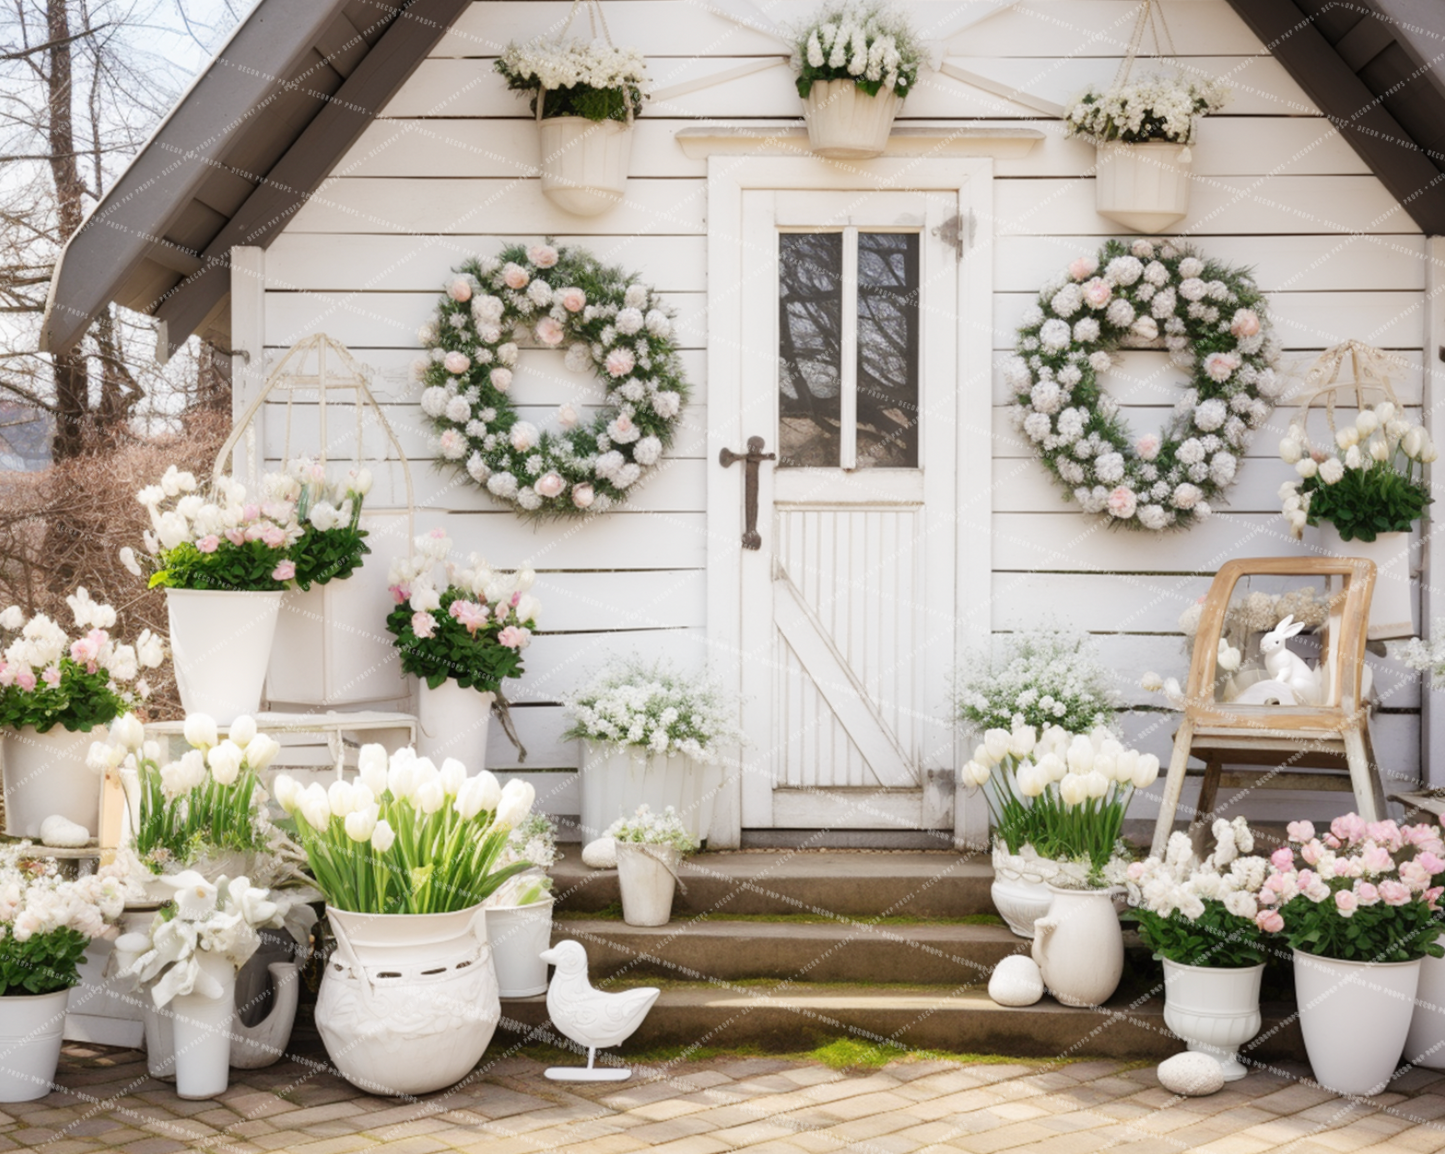 EASTER SHED - PKP